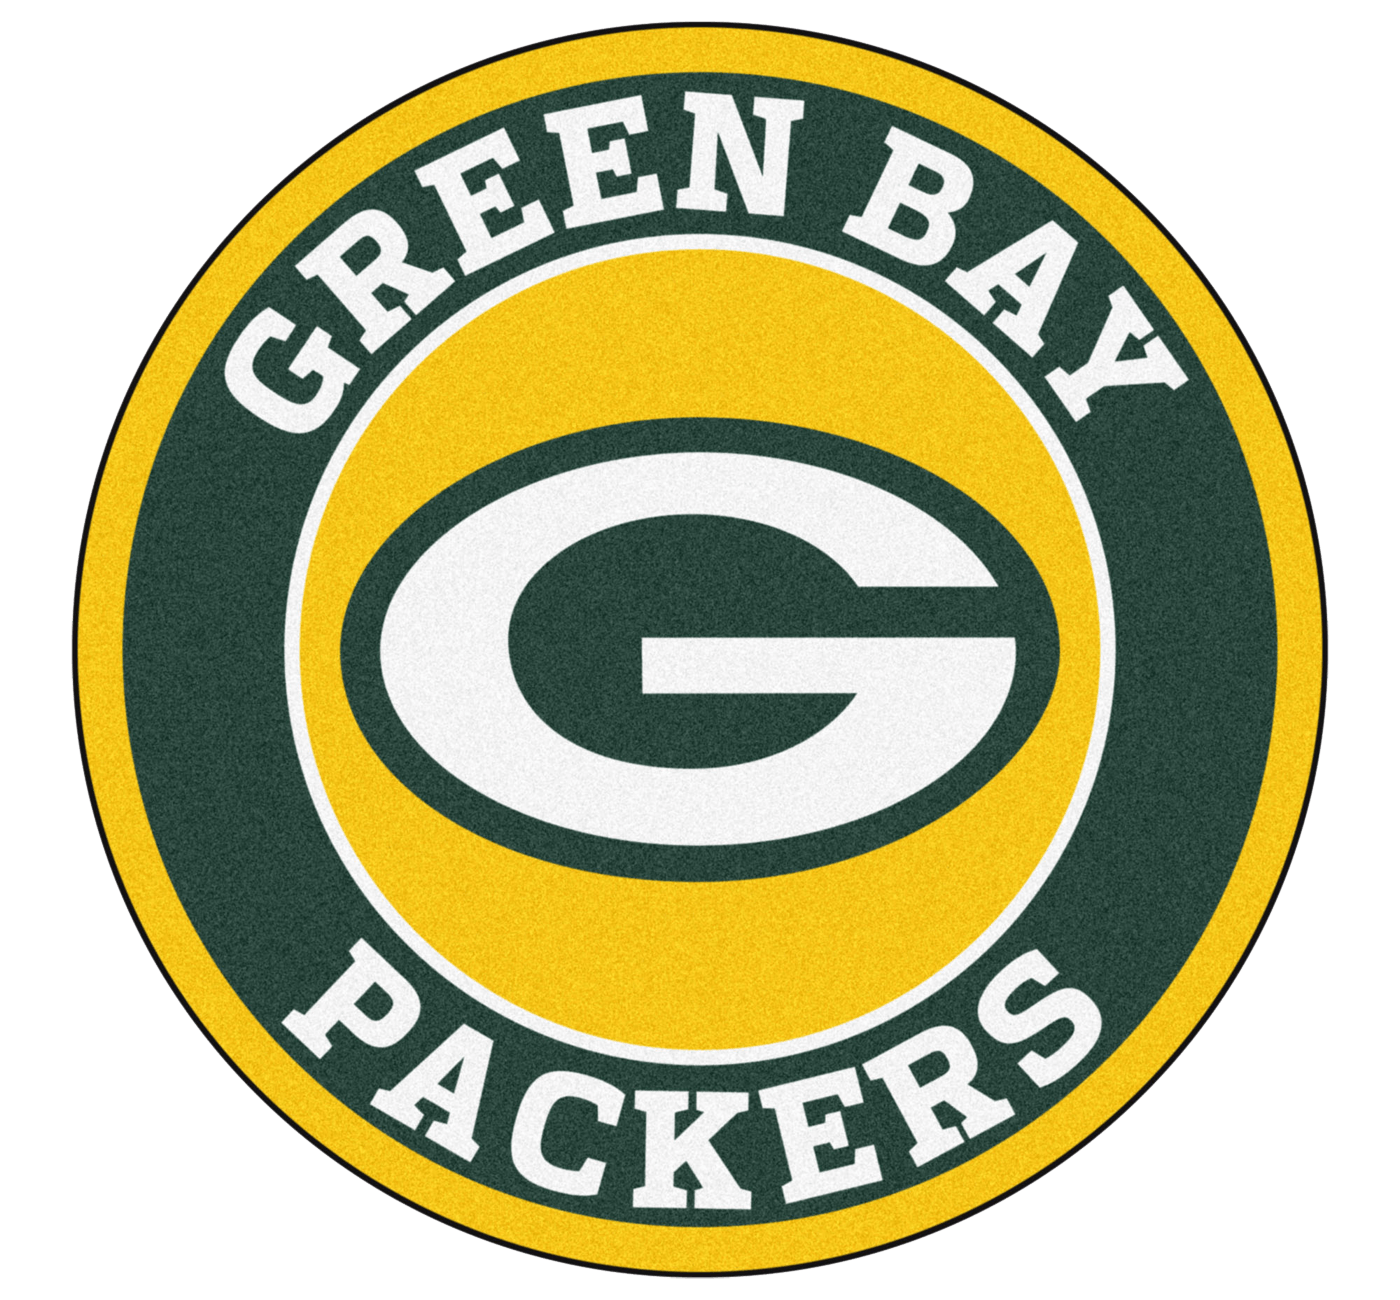 Green Bay Logo - Green Bay Packers Logo, Green Bay Packers Symbol Meaning, History ...